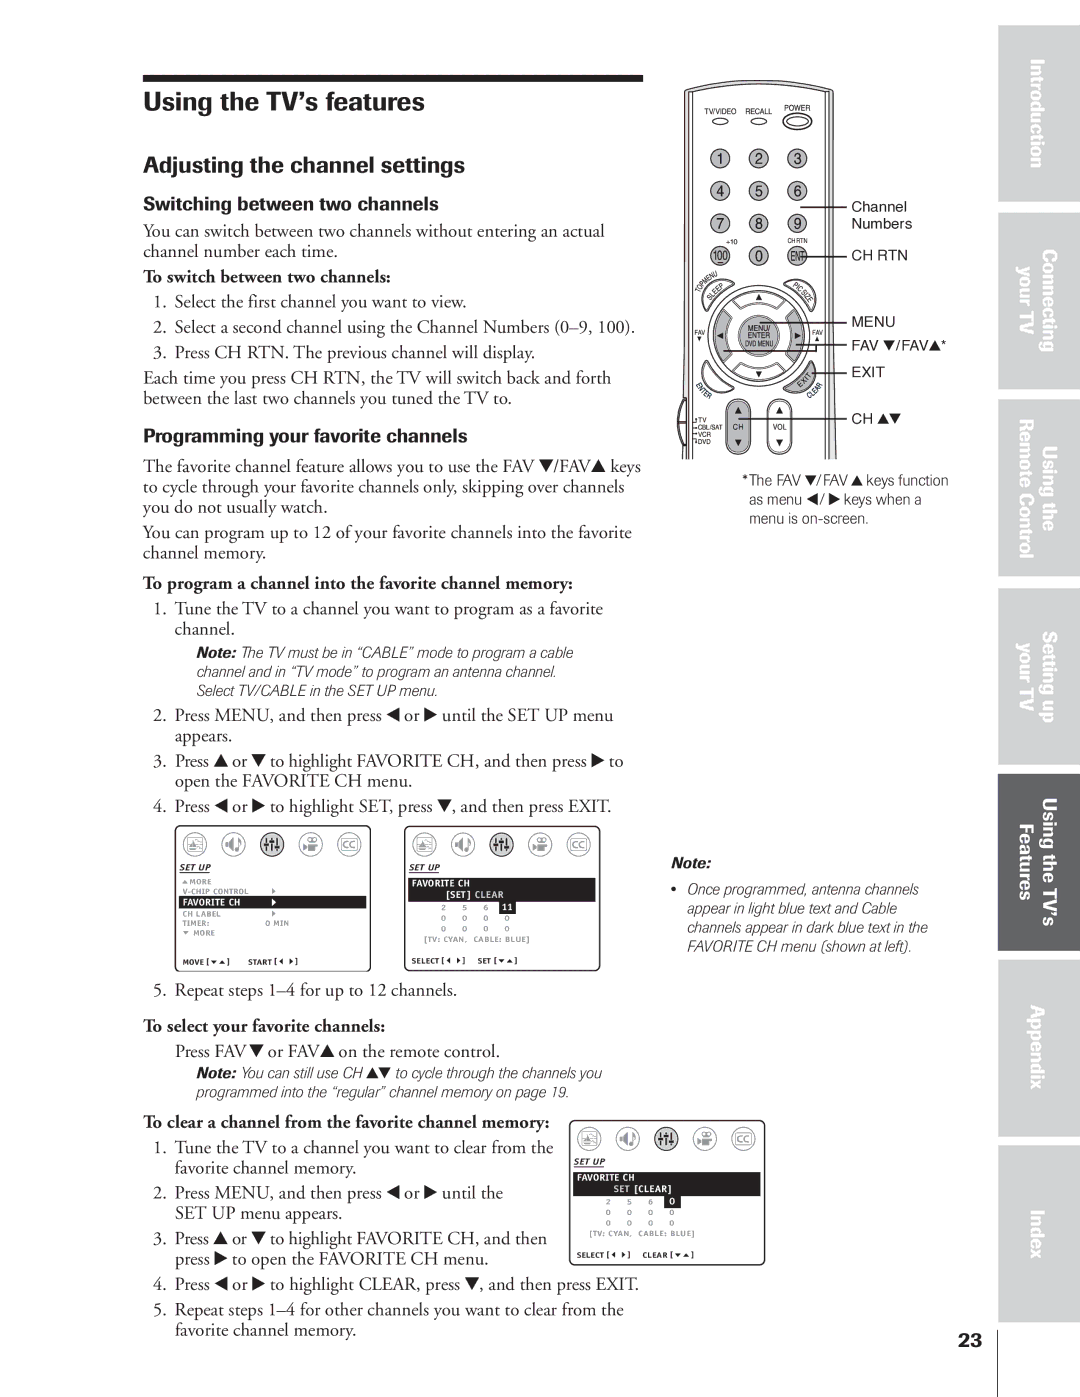 Toshiba 32AF14 owner manual Using the TV’s features, Adjusting the channel settings, Switching between two channels 